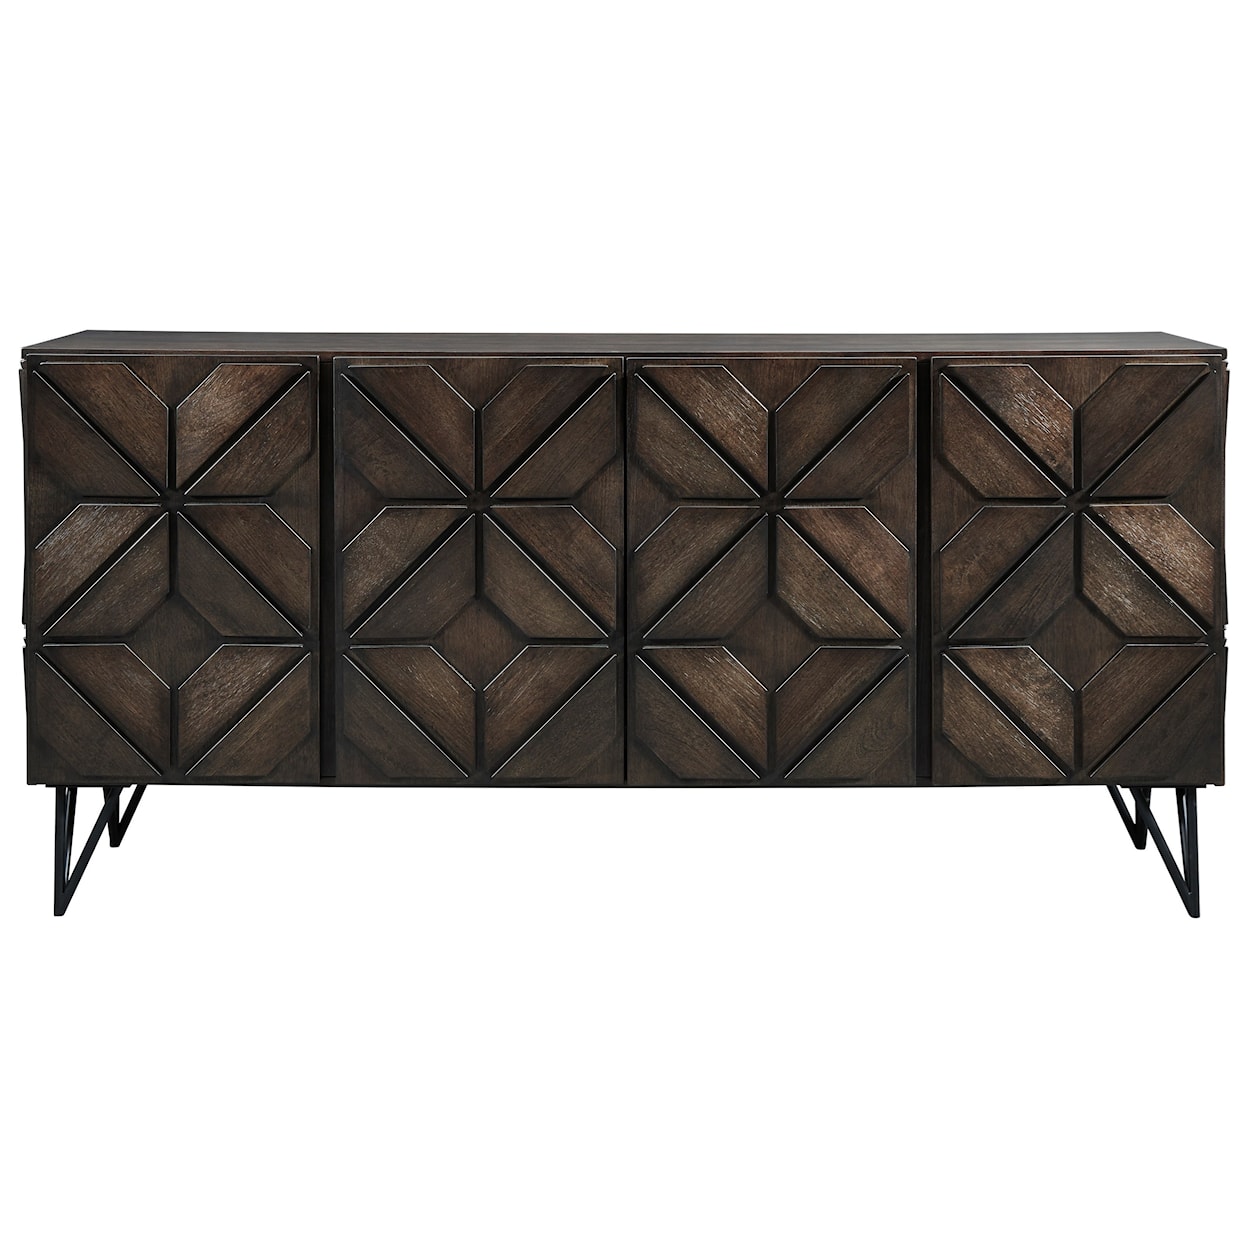 Signature Design by Ashley Chasinfield TV Stand